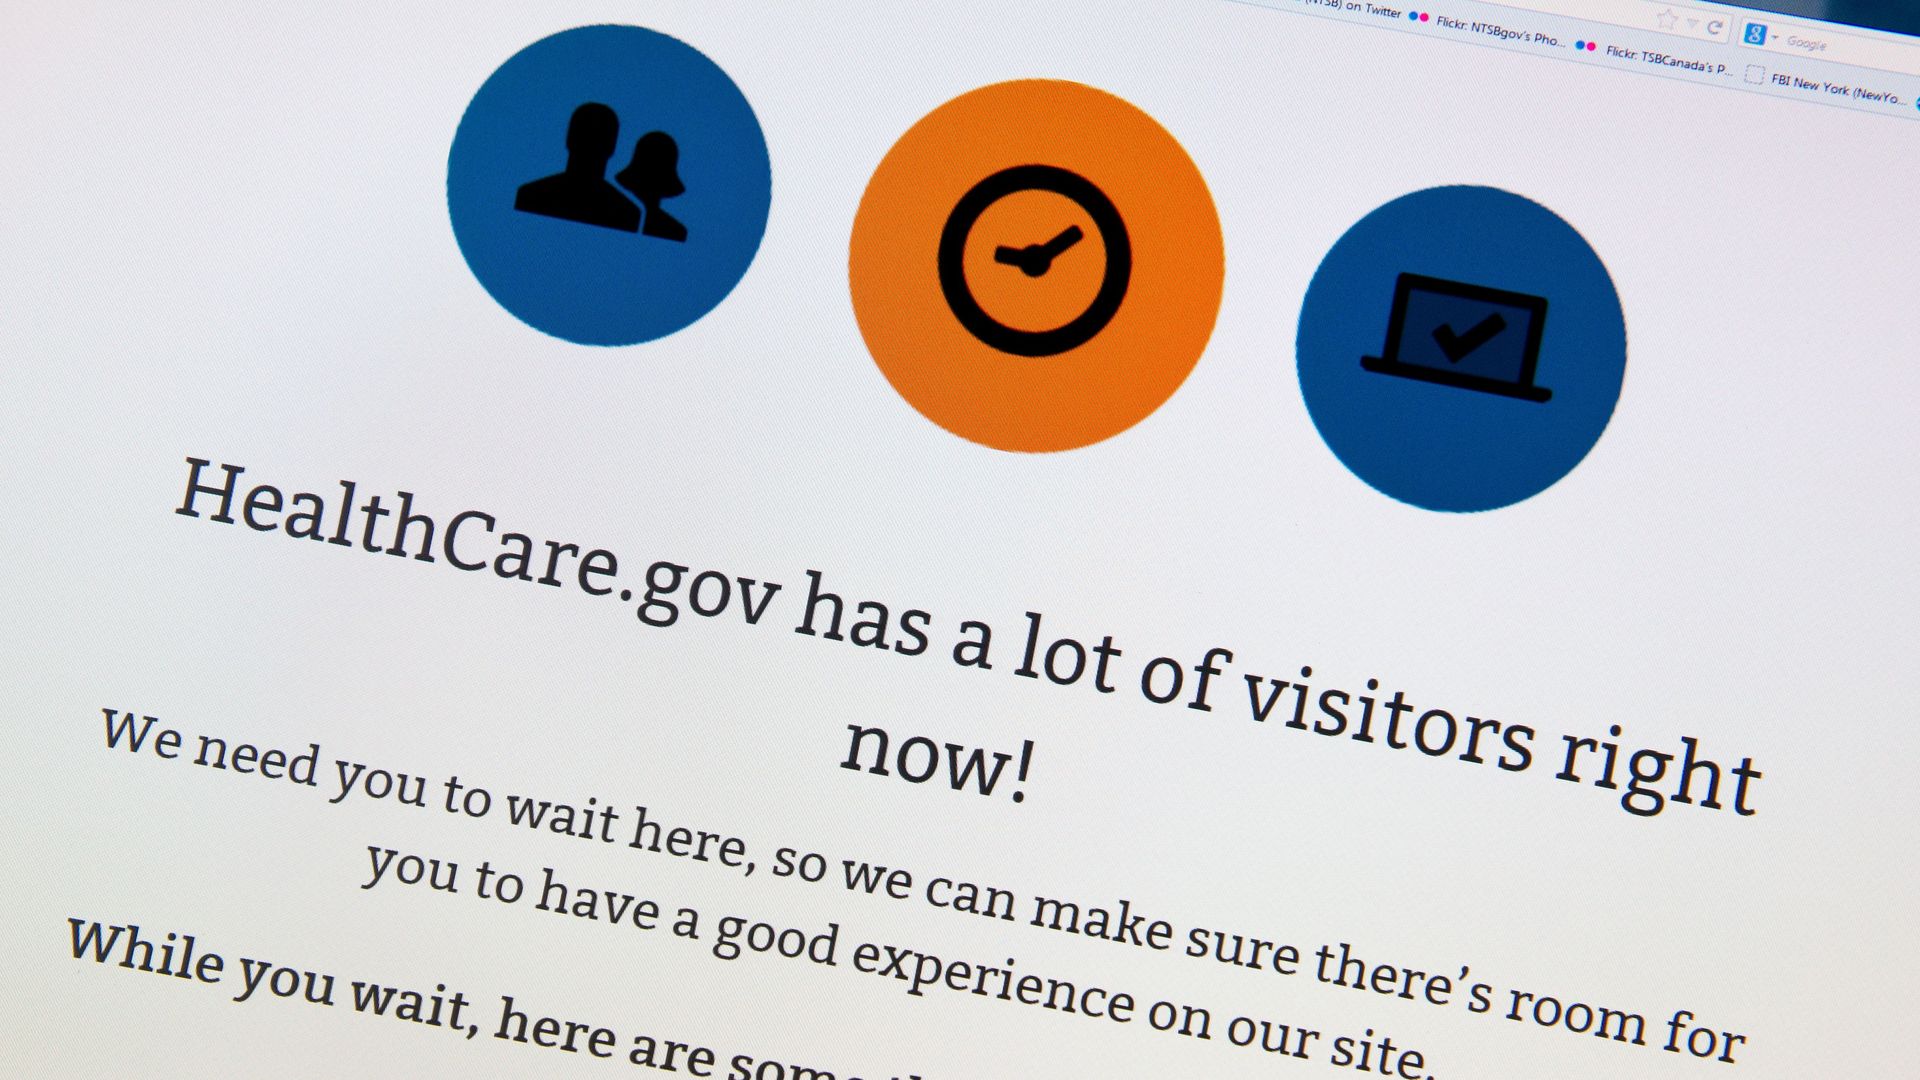 A photo of a screen showing that healthcare.gov has a lot of visitors